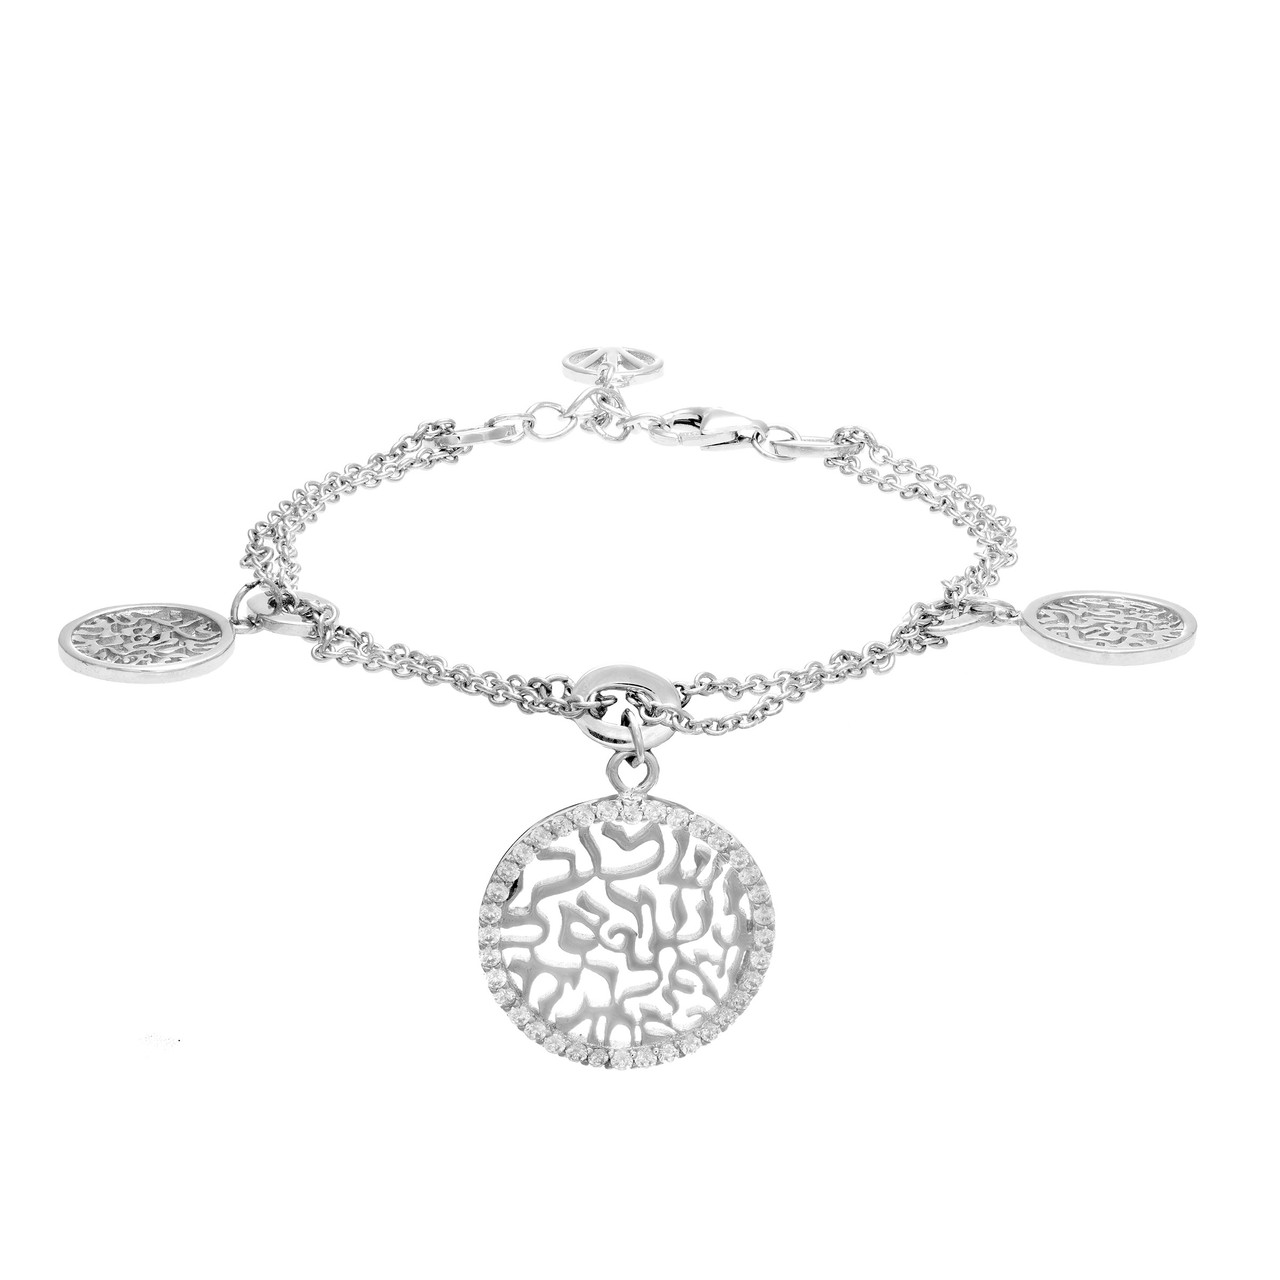 Lona - Shema-Or Silver bracelets with triple charms.